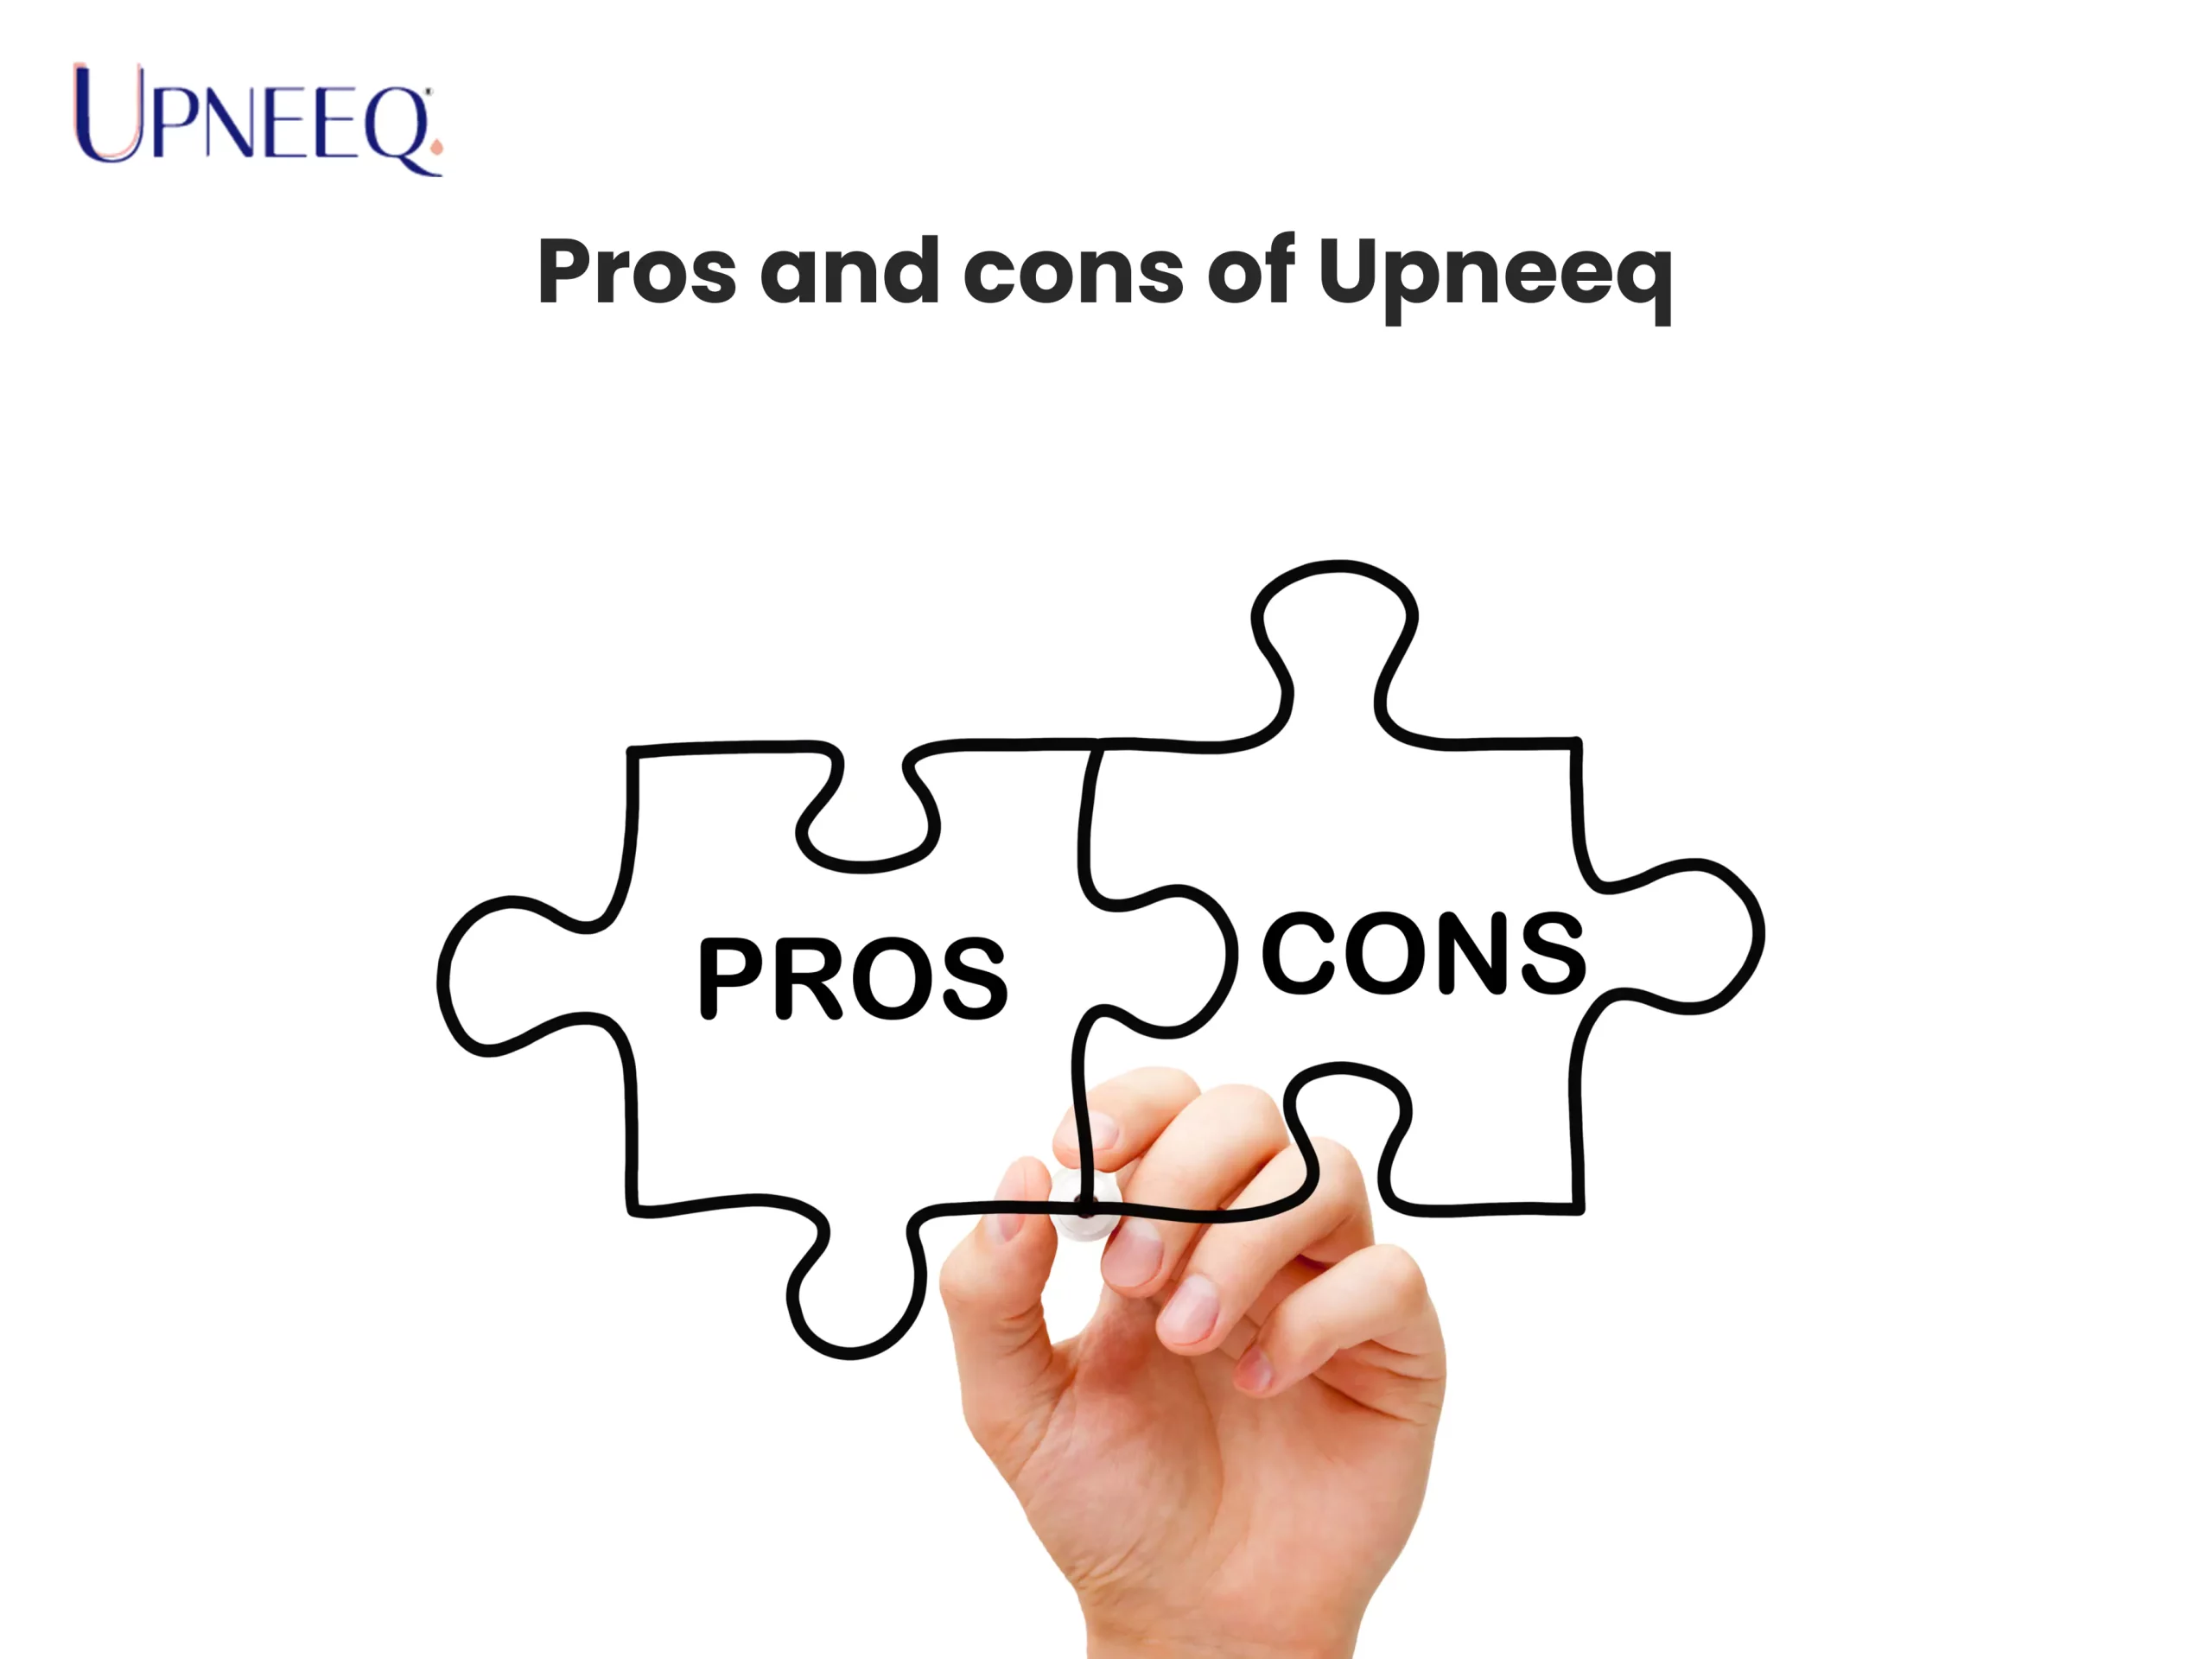 Pros and cons of Upneeq